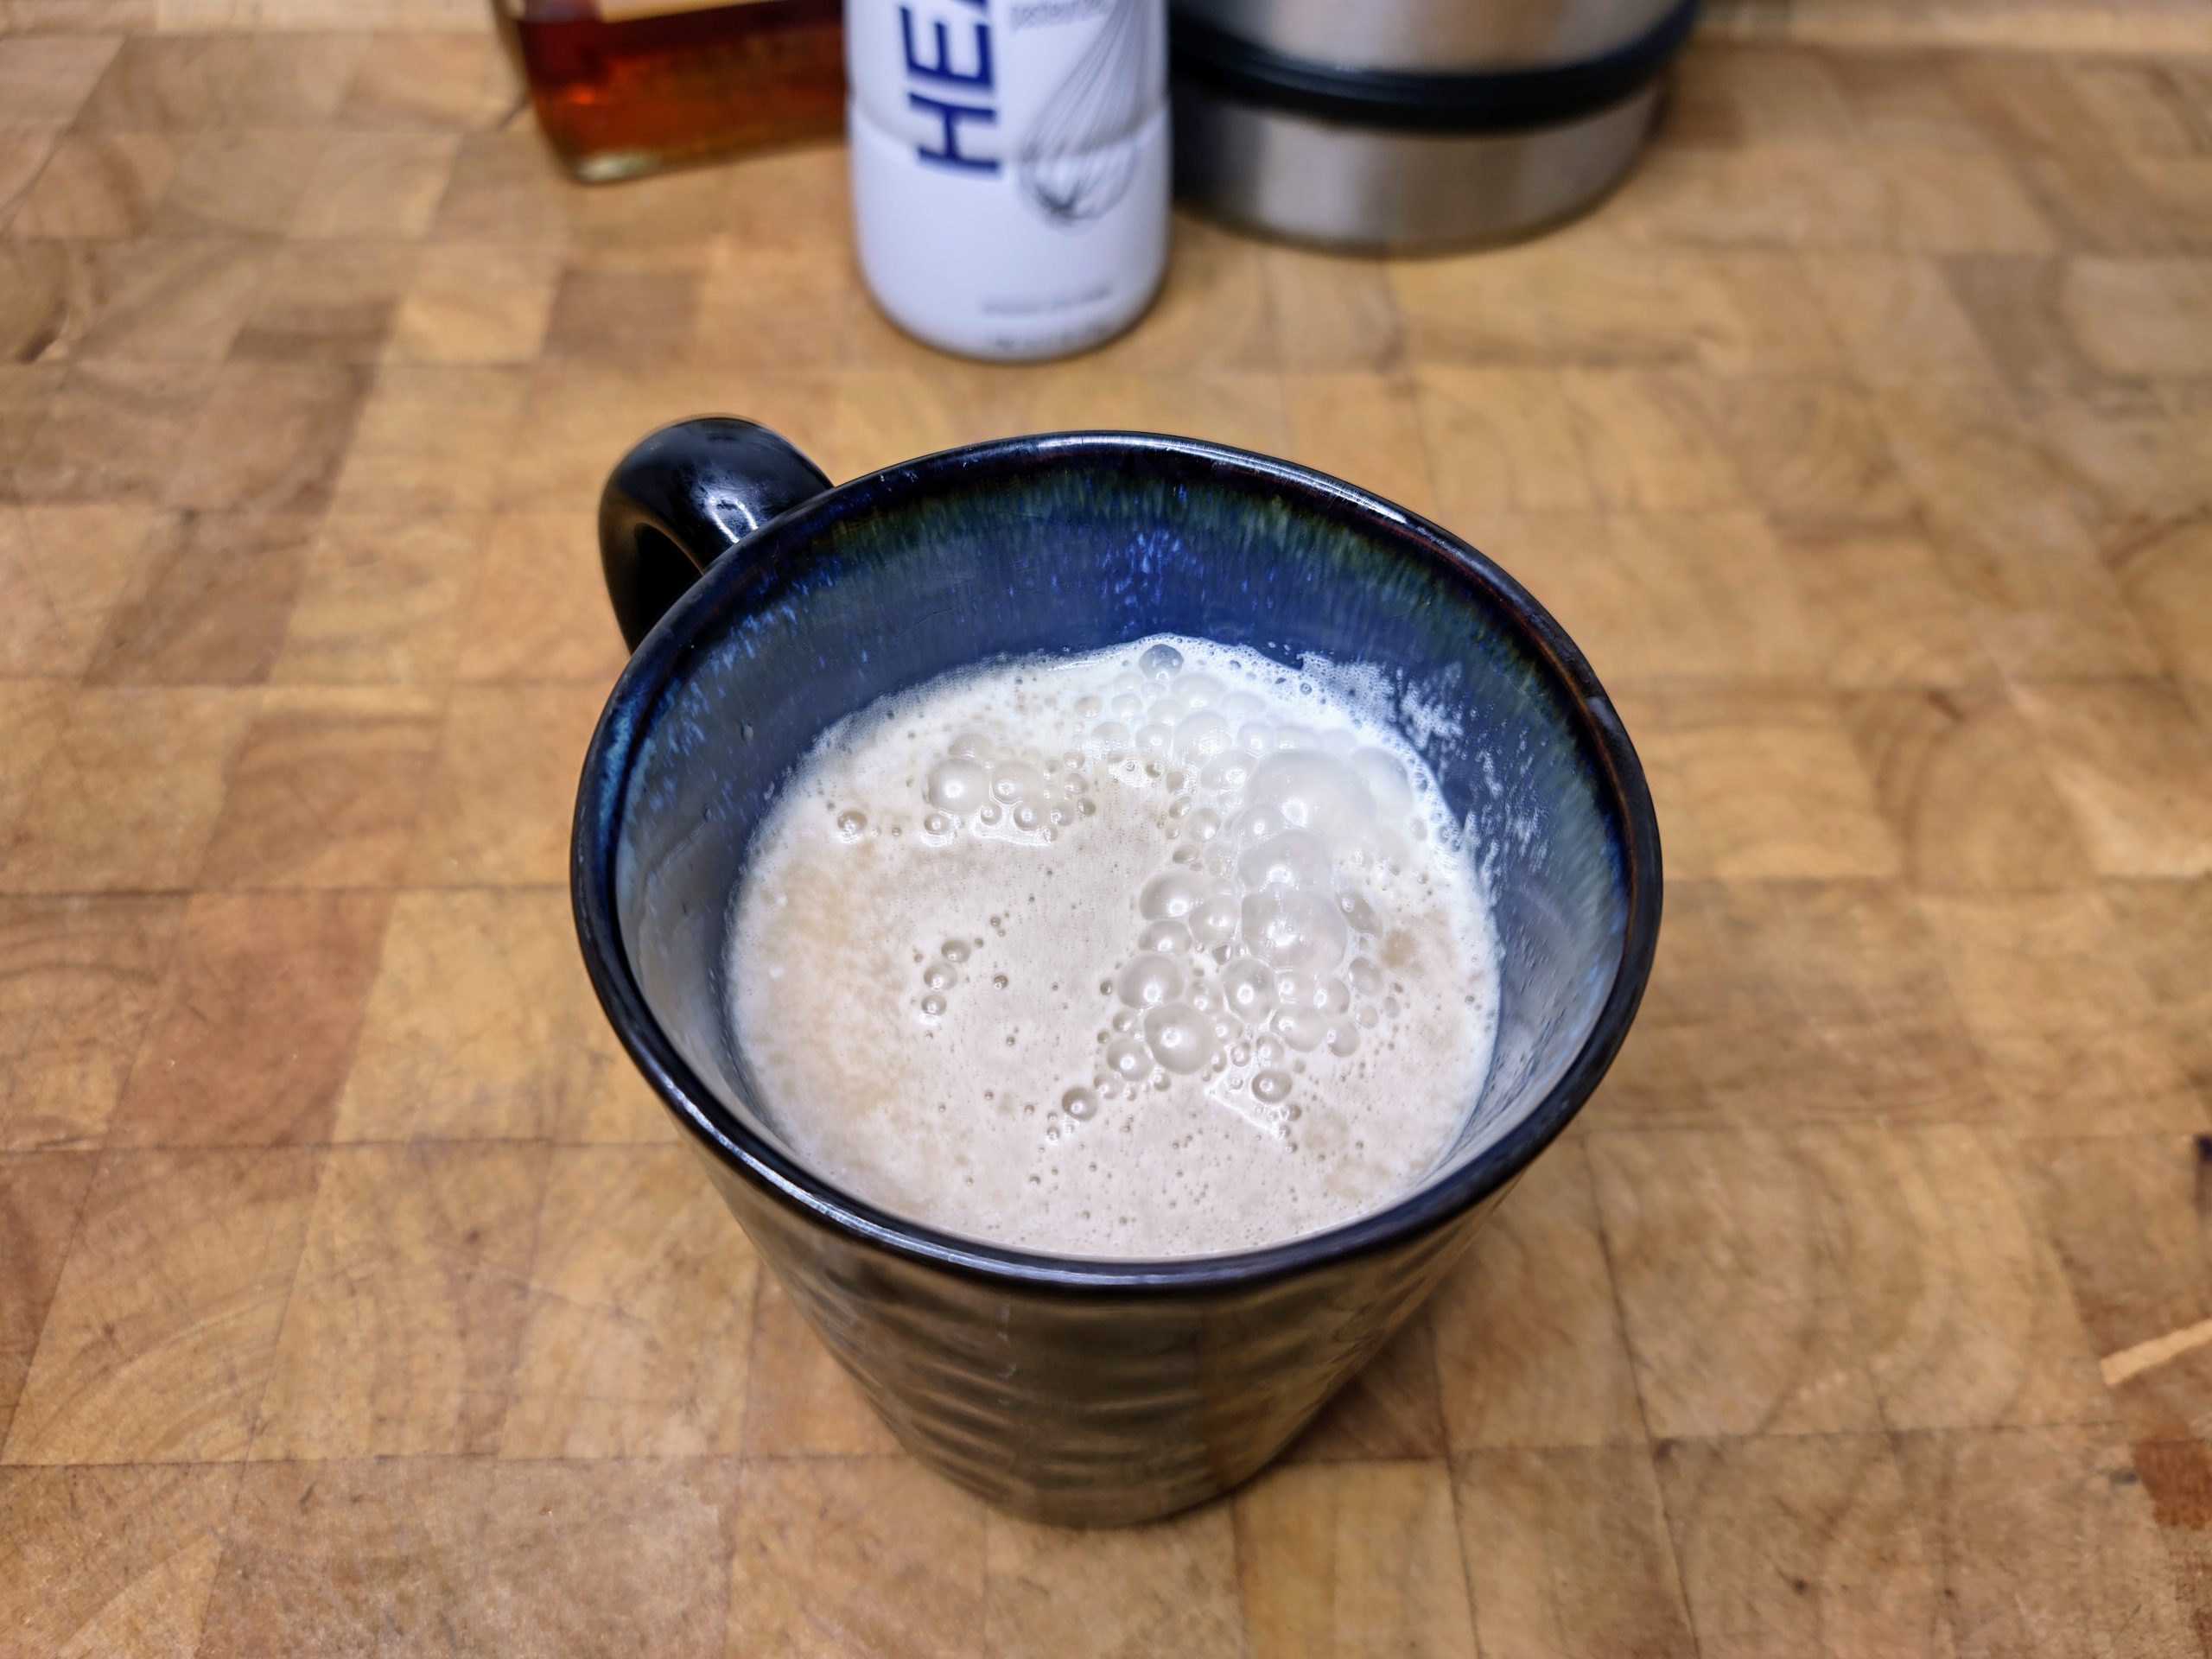 amaretto coffee in a coffee mug on a wooden table with ingredients in the background